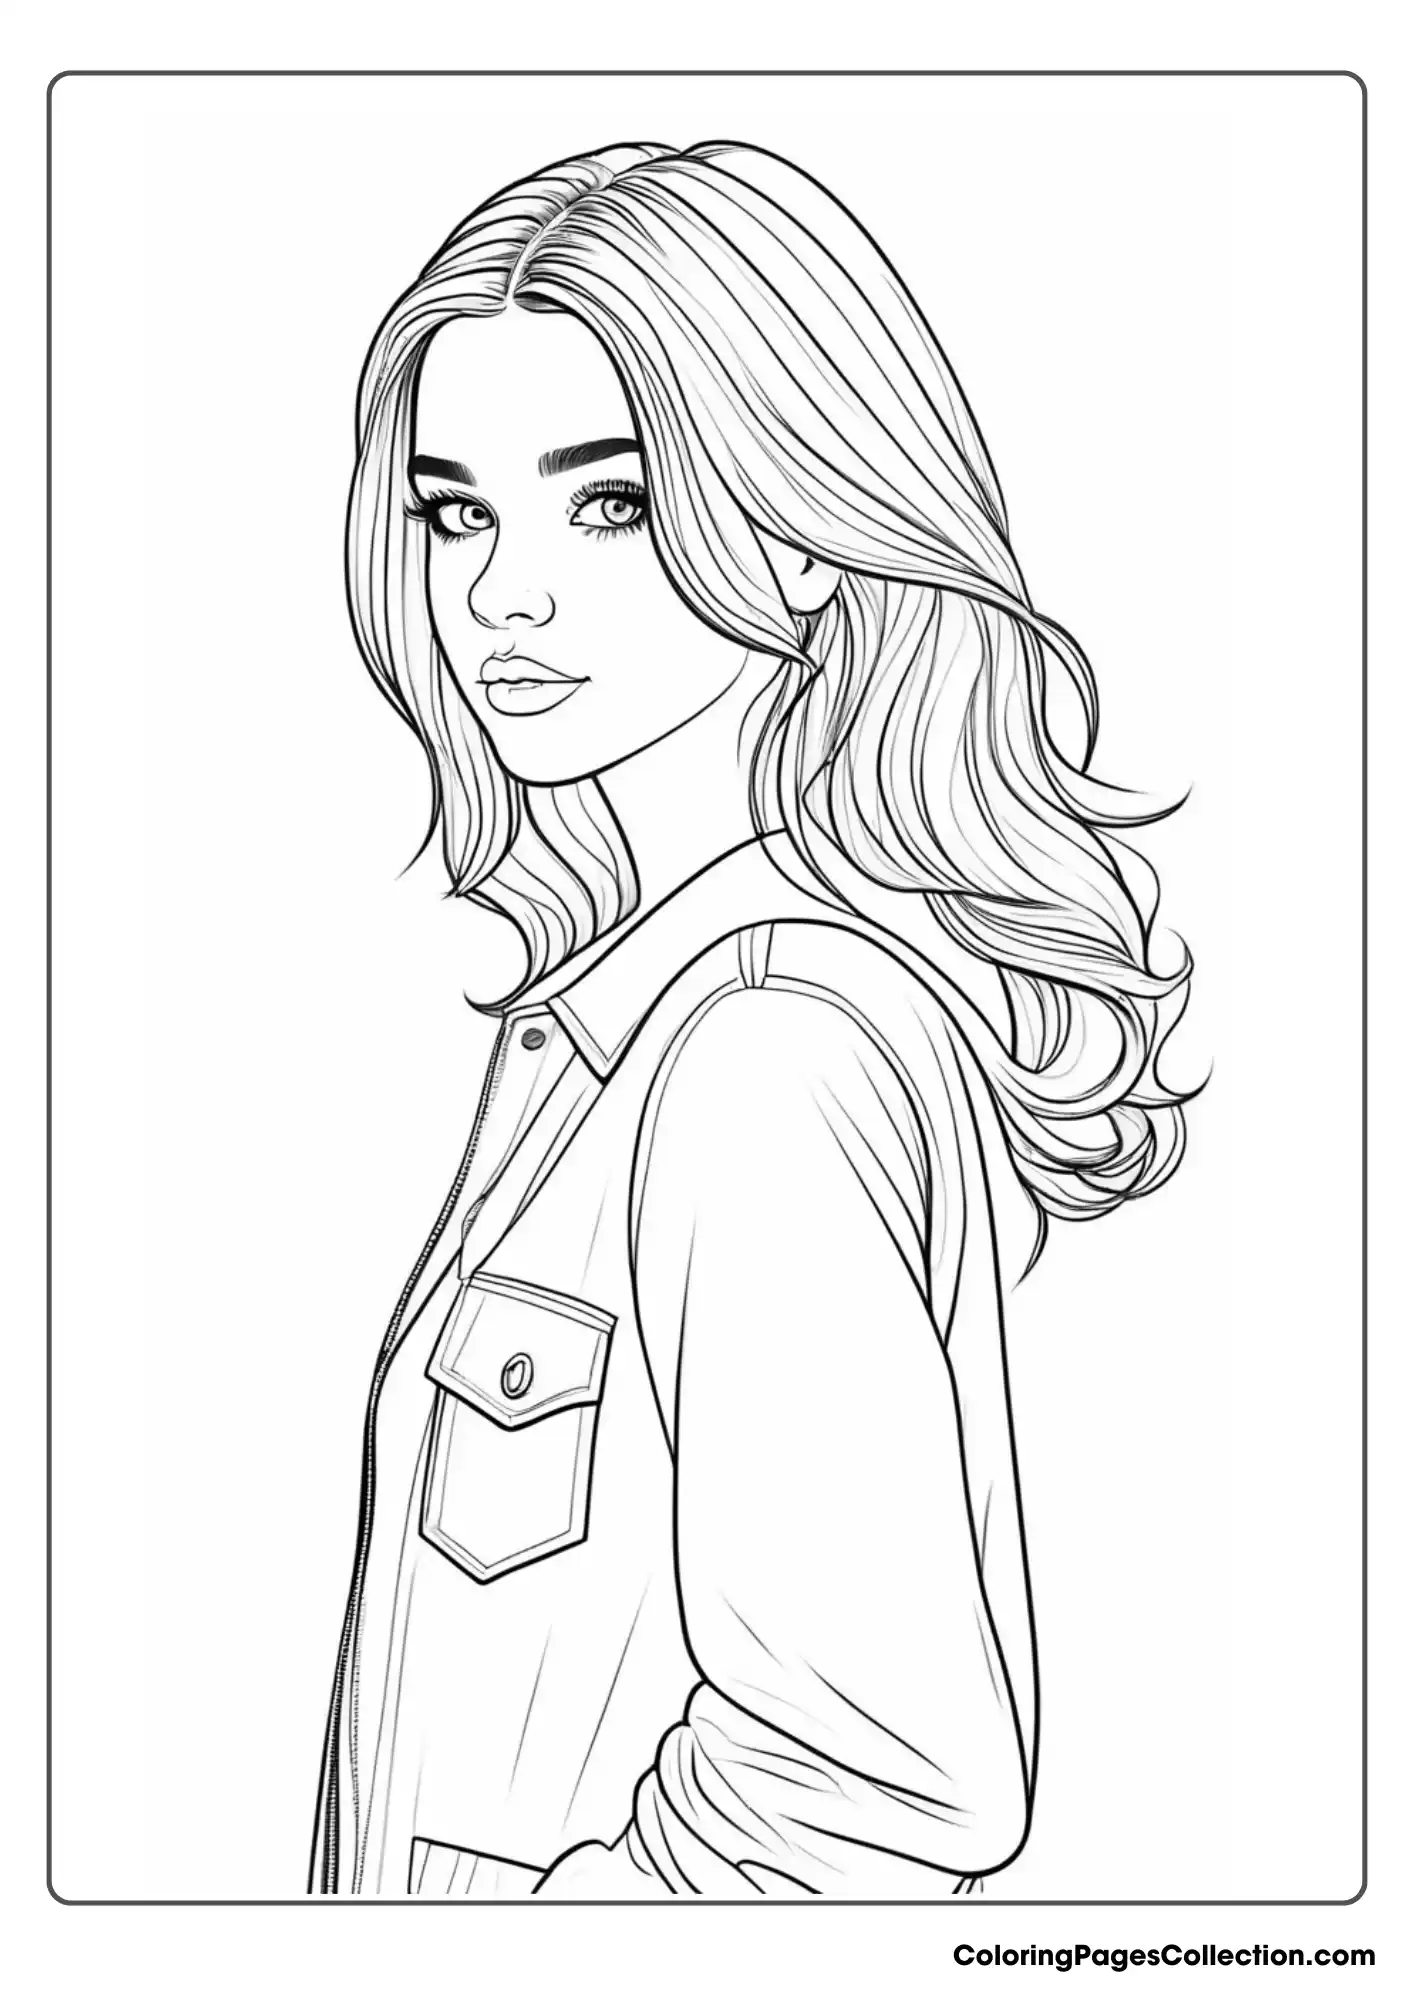 Coloring pages for teens, Beautiful Realistic Girl Coloring Page